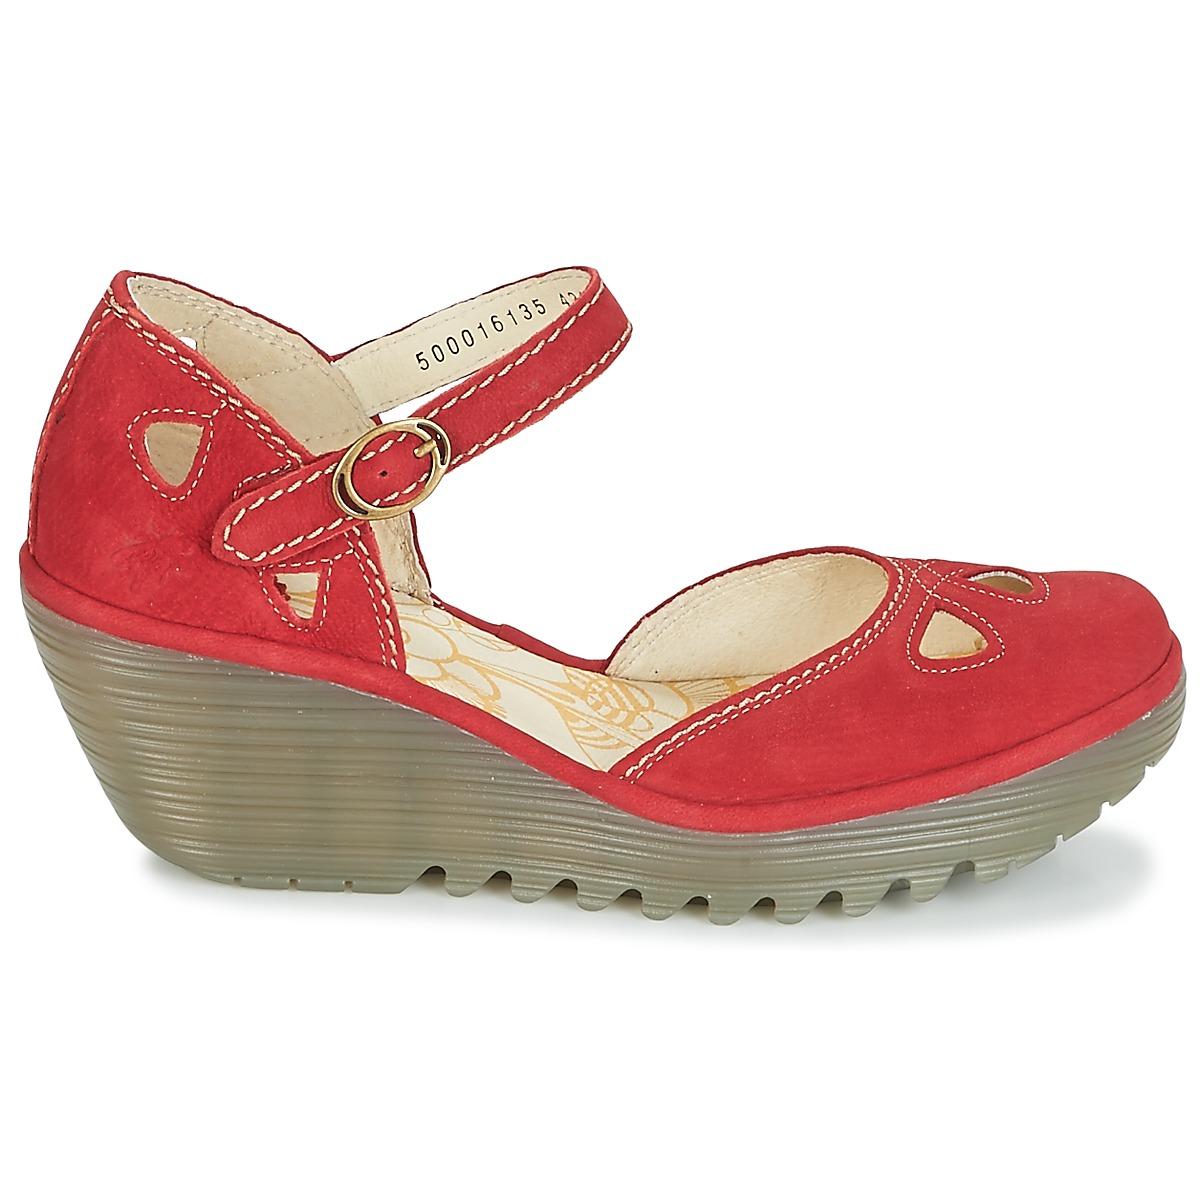 Fly London Yuna Heels in Red - Save 14% - Lyst